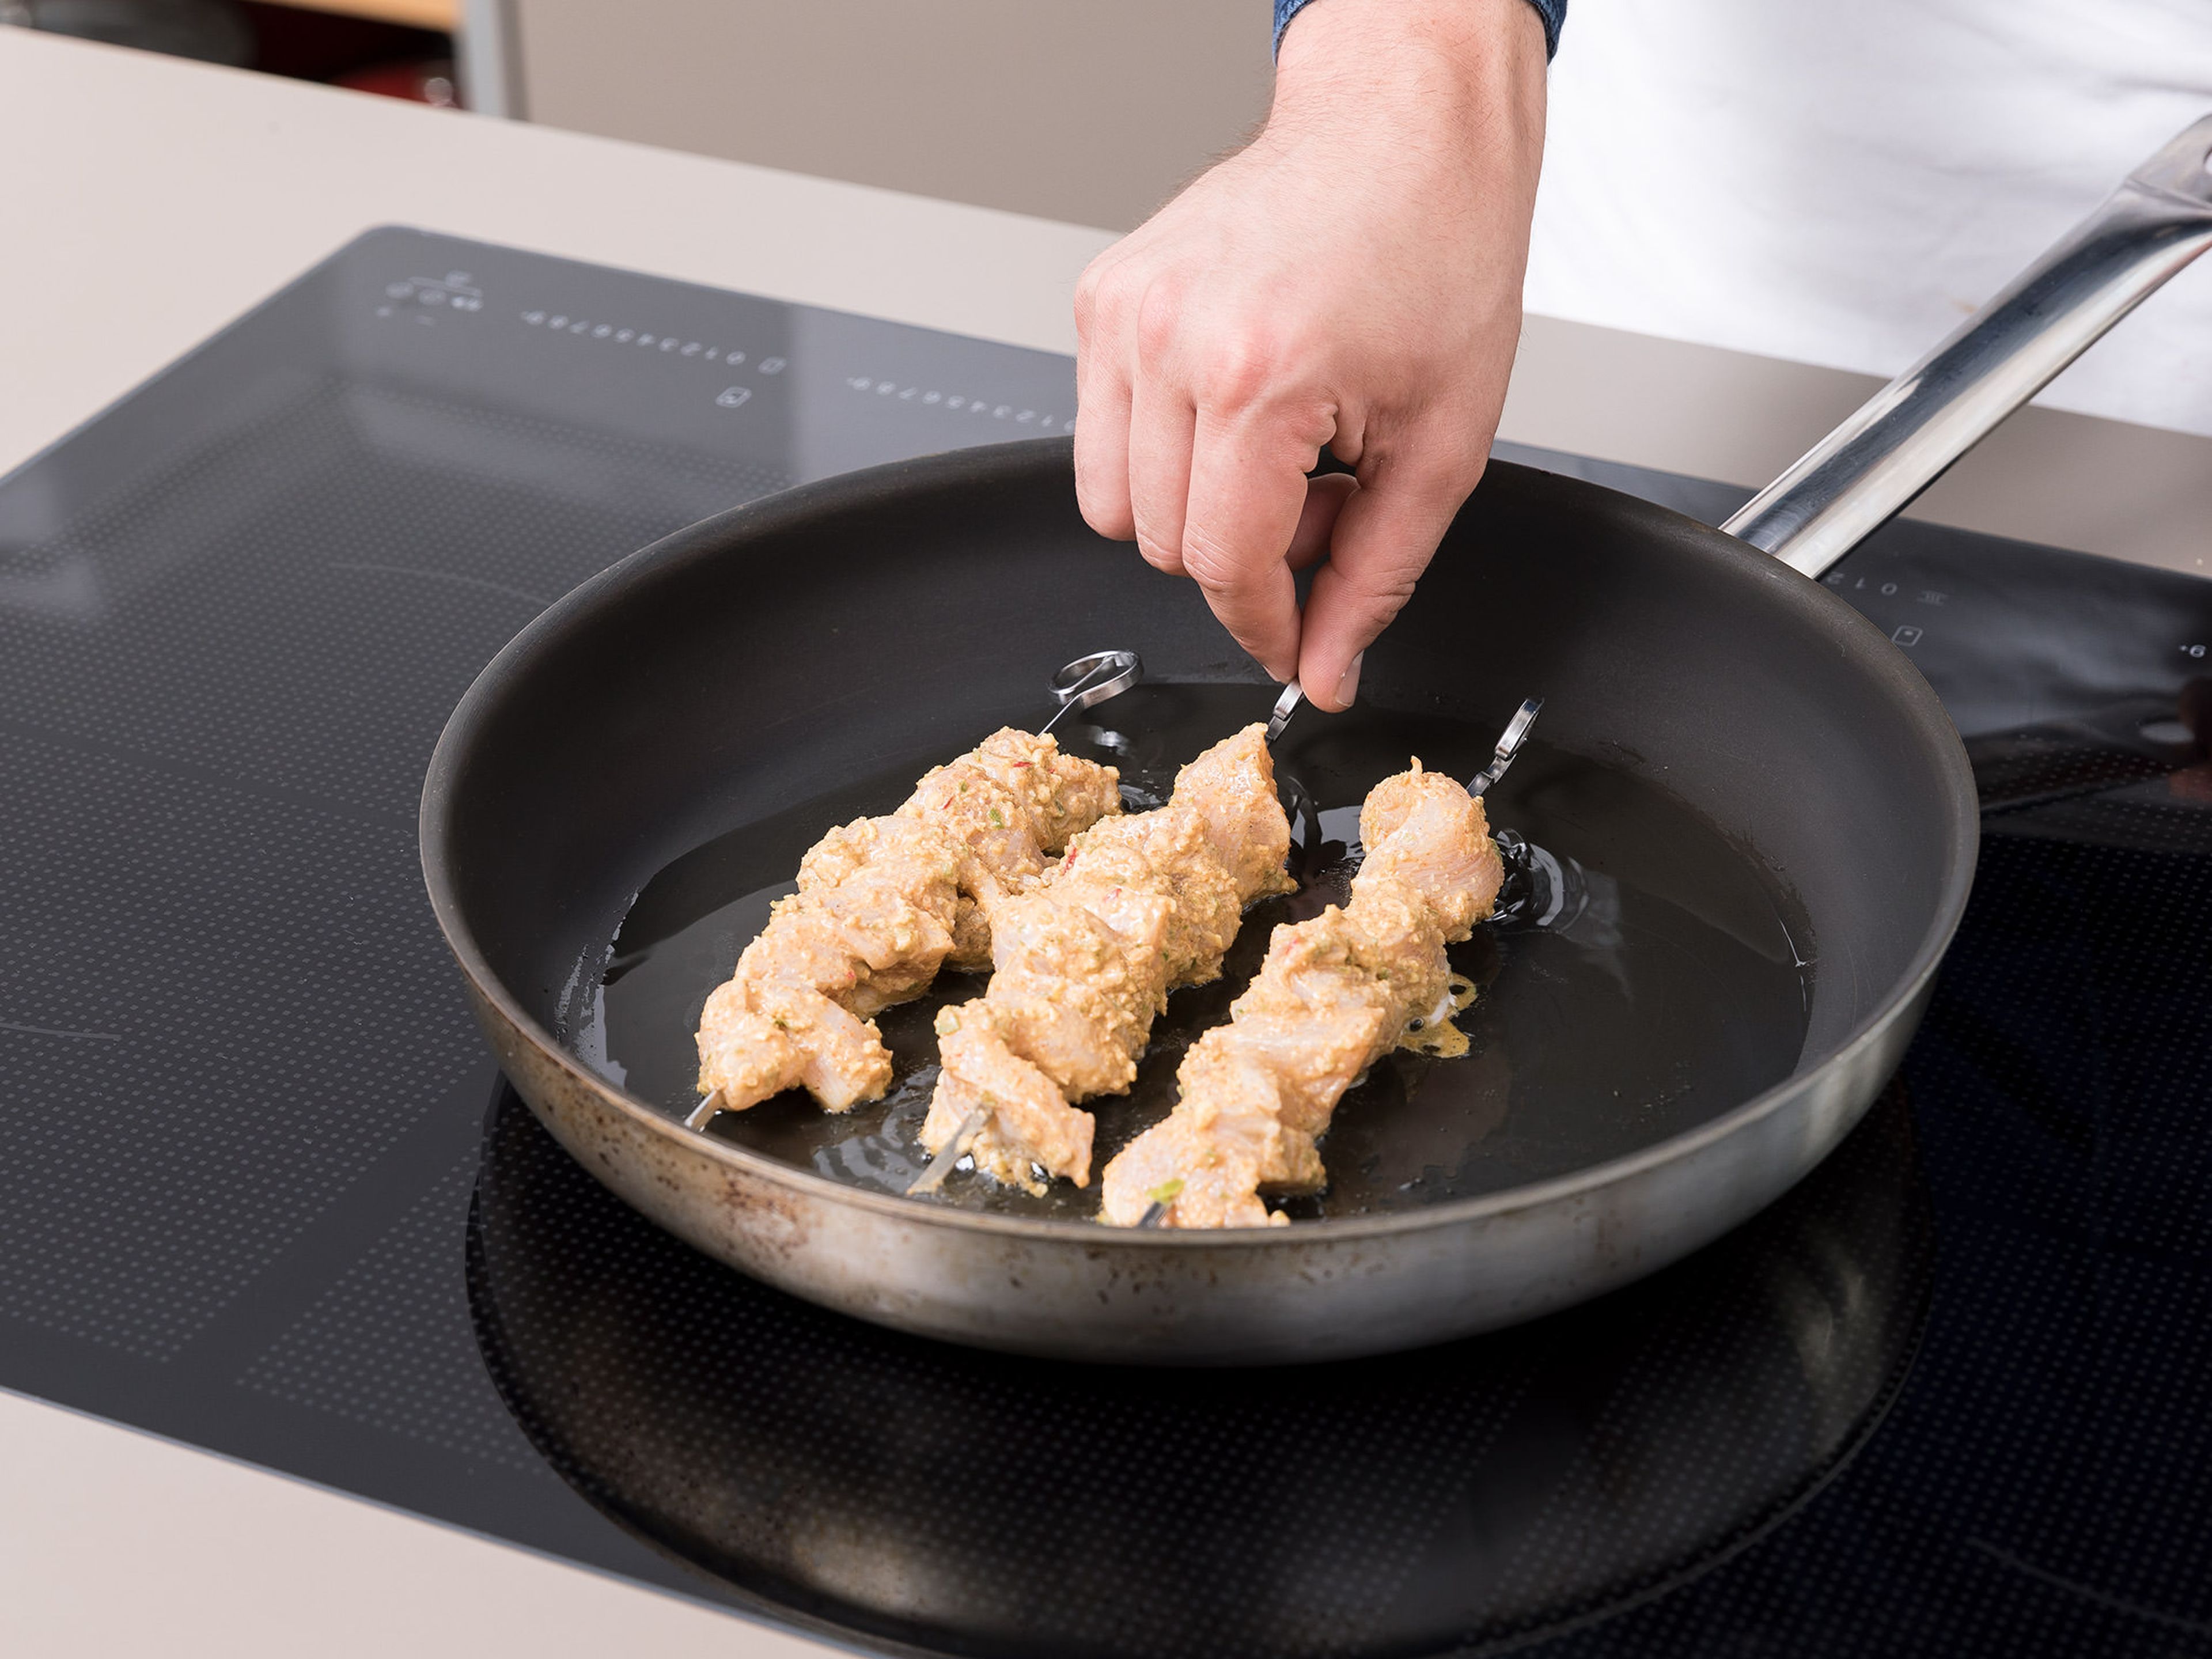 Add vegetable oil to a frying pan over medium heat, and fry chicken until cooked through. Alternatively, you can thread the chicken onto skewers and fry them on all sides. Serve warm with parathas. Enjoy!